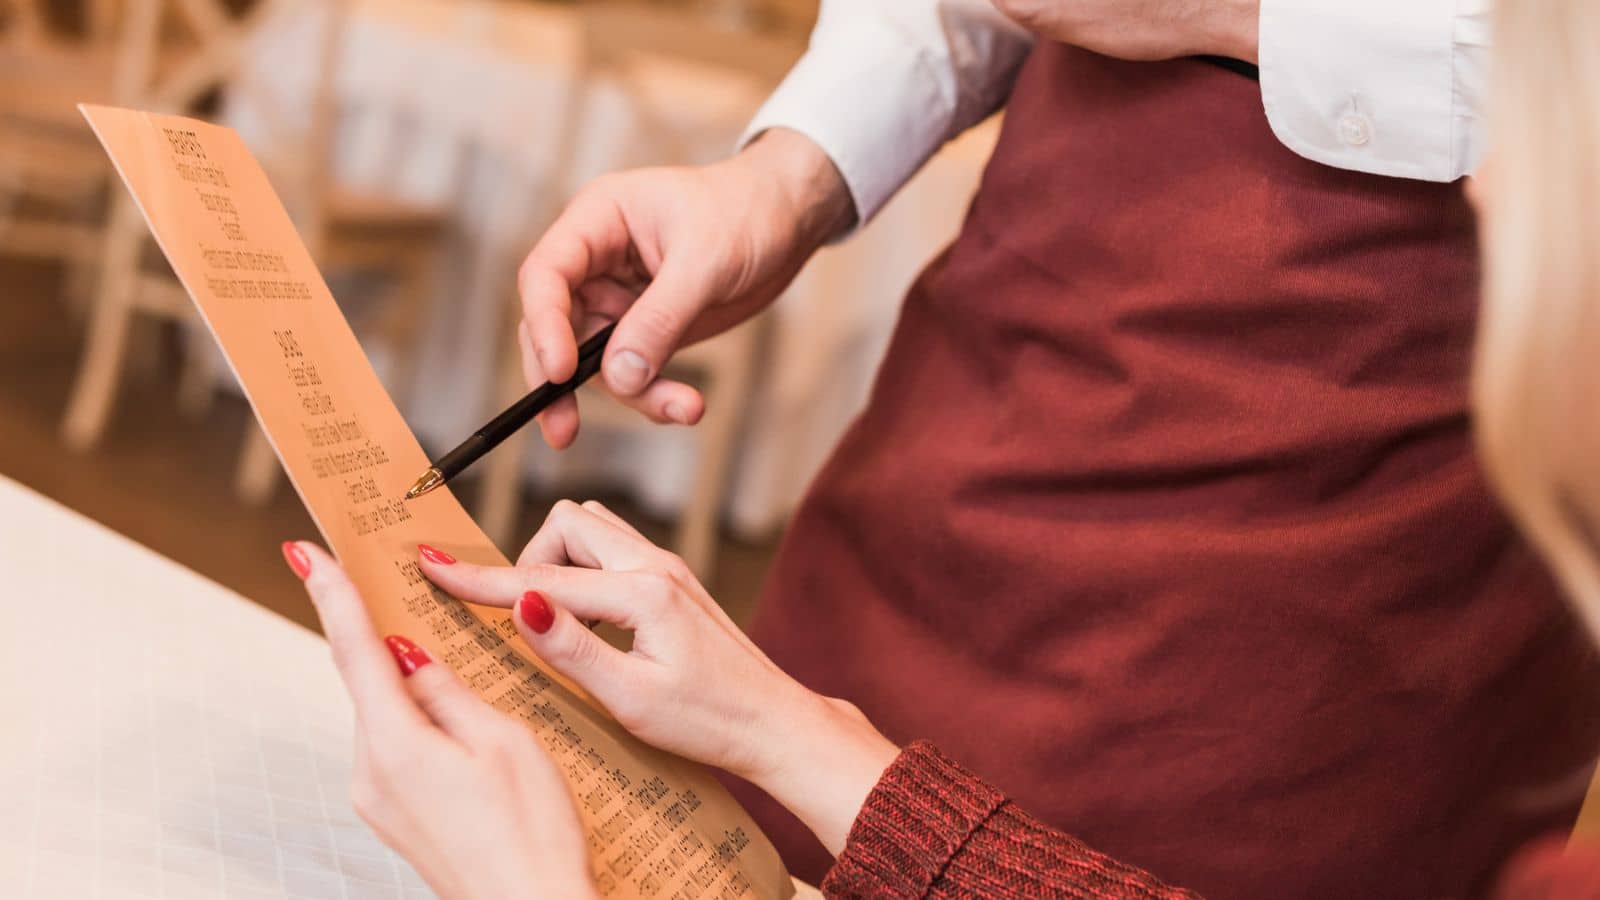 10 Tactics Restaurants Use To Trick You To Spend More